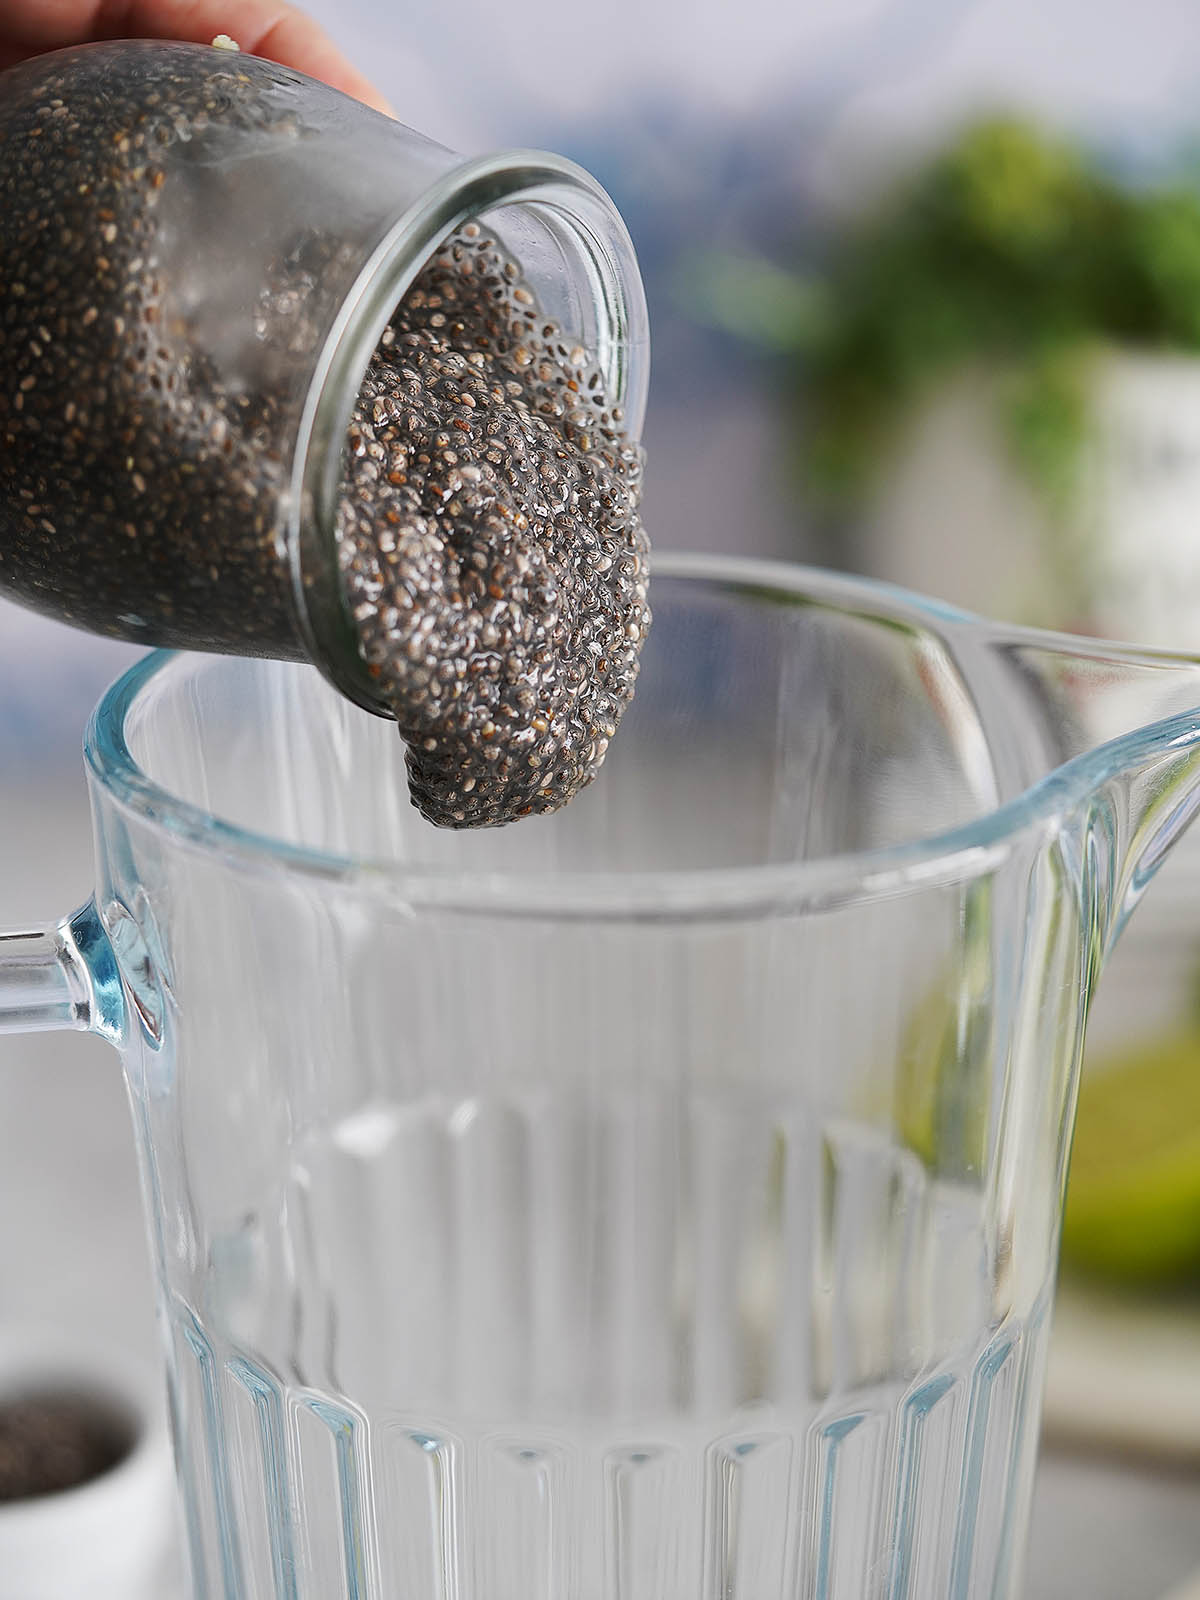 Adding the chia seeds into a jar.